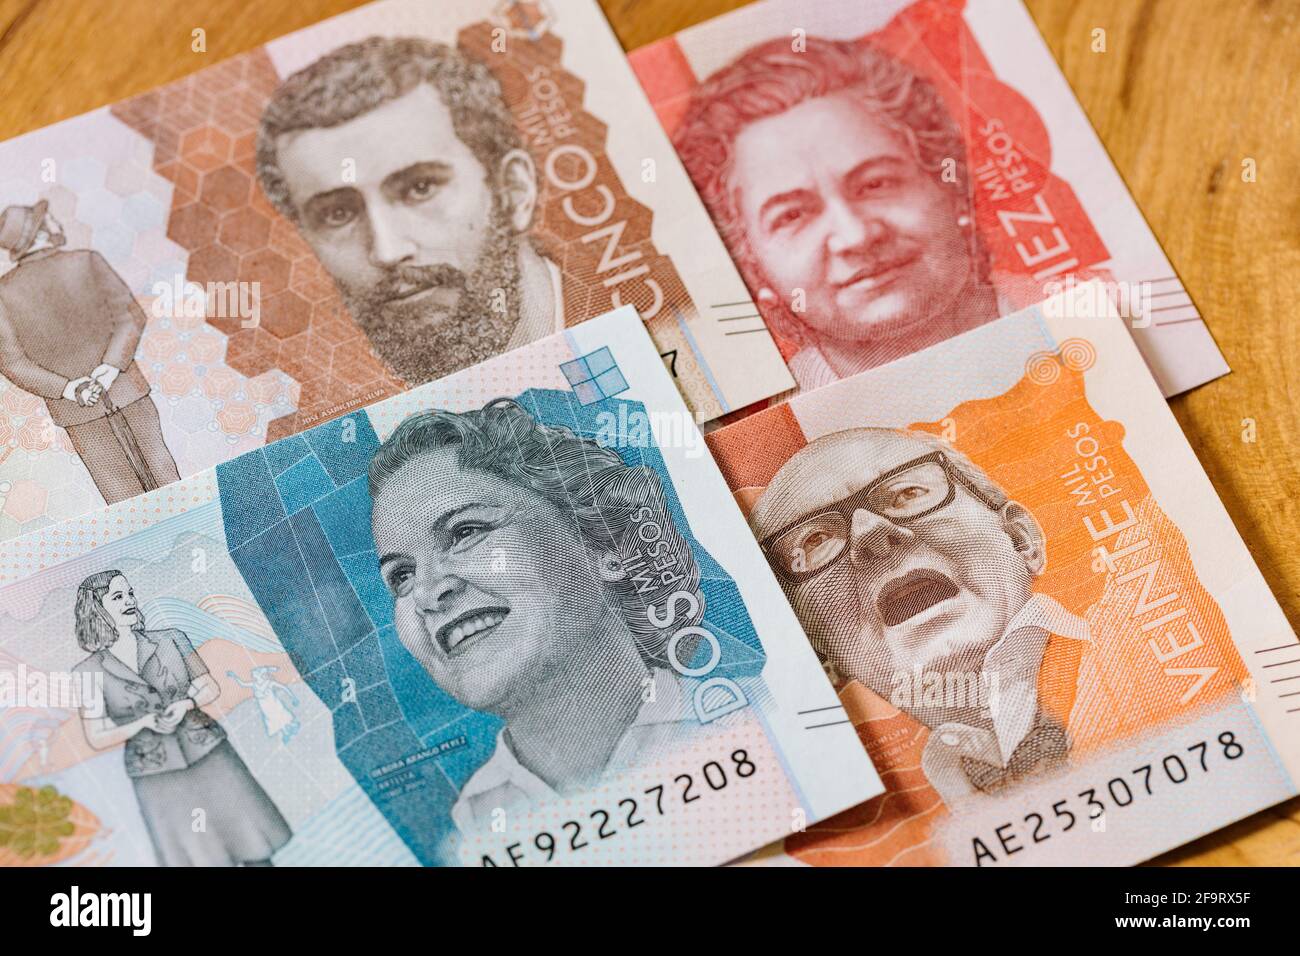 Colombian banknotes of 2, 5, 10 and 20 thousand pesos Stock Photo